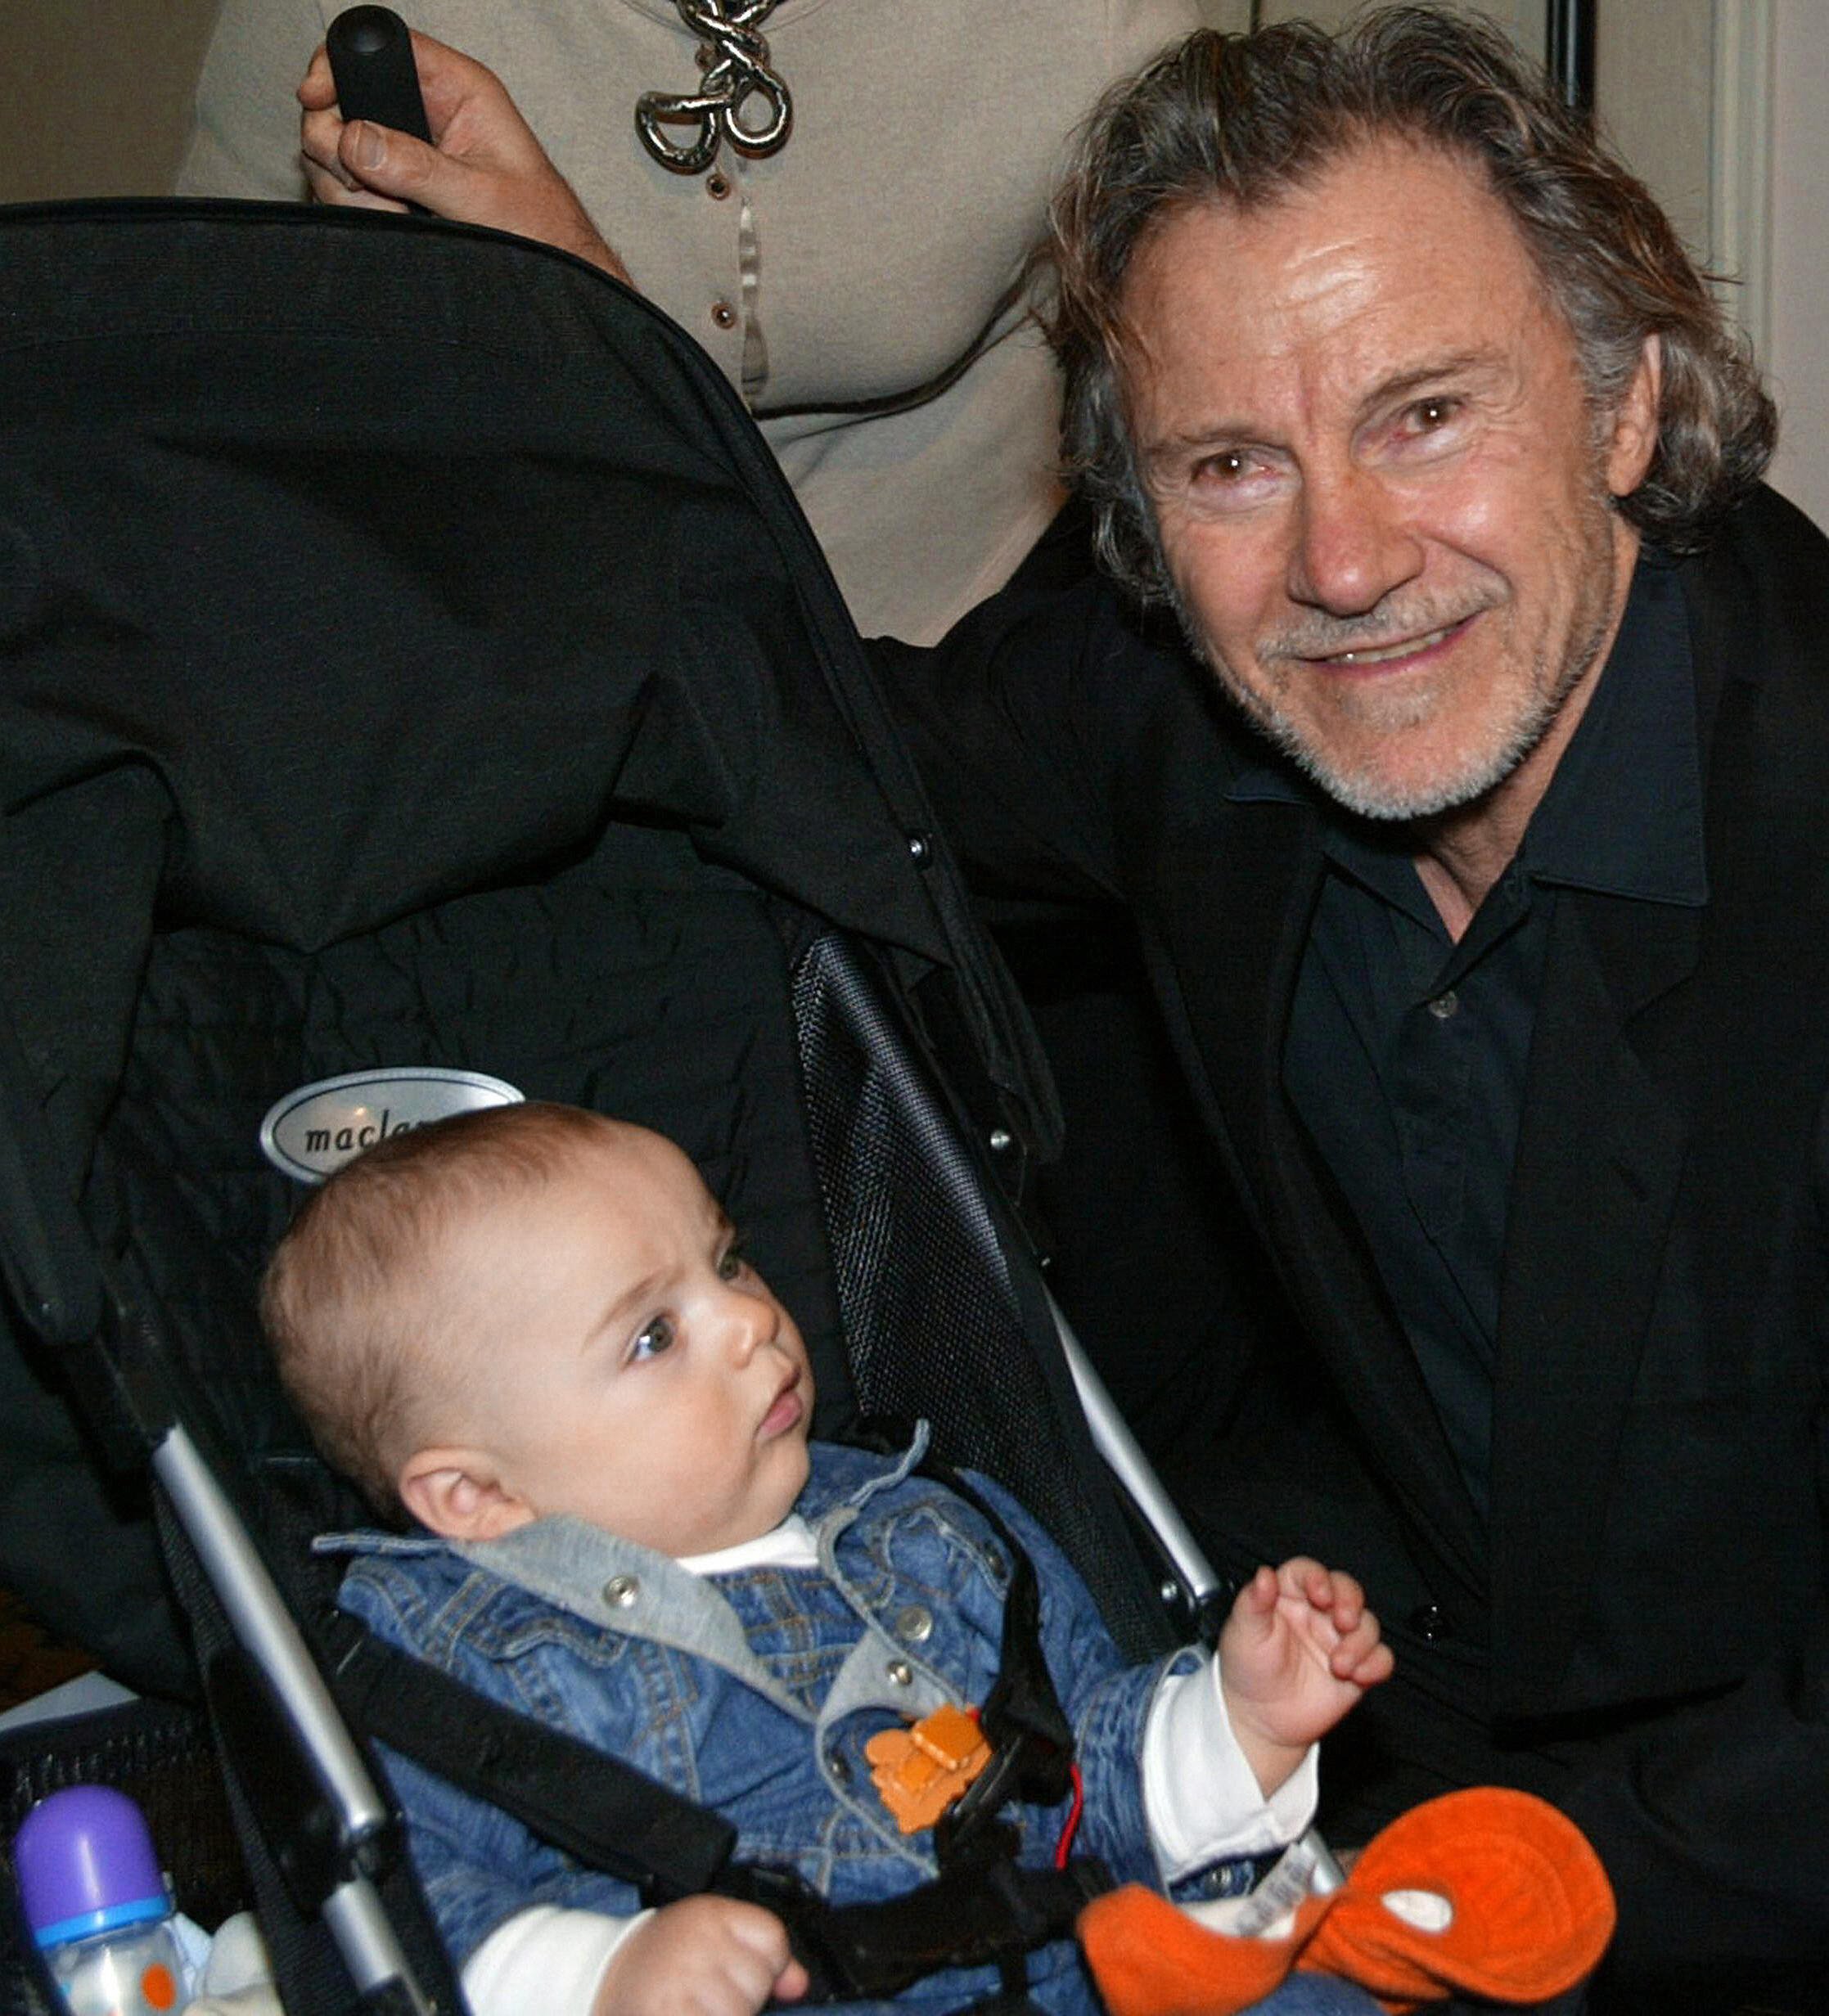 US actor Harvey Keitel poses with his son Roman before a press conference in an Istanbul hotel 15 April 2005. | Source: Getty Images